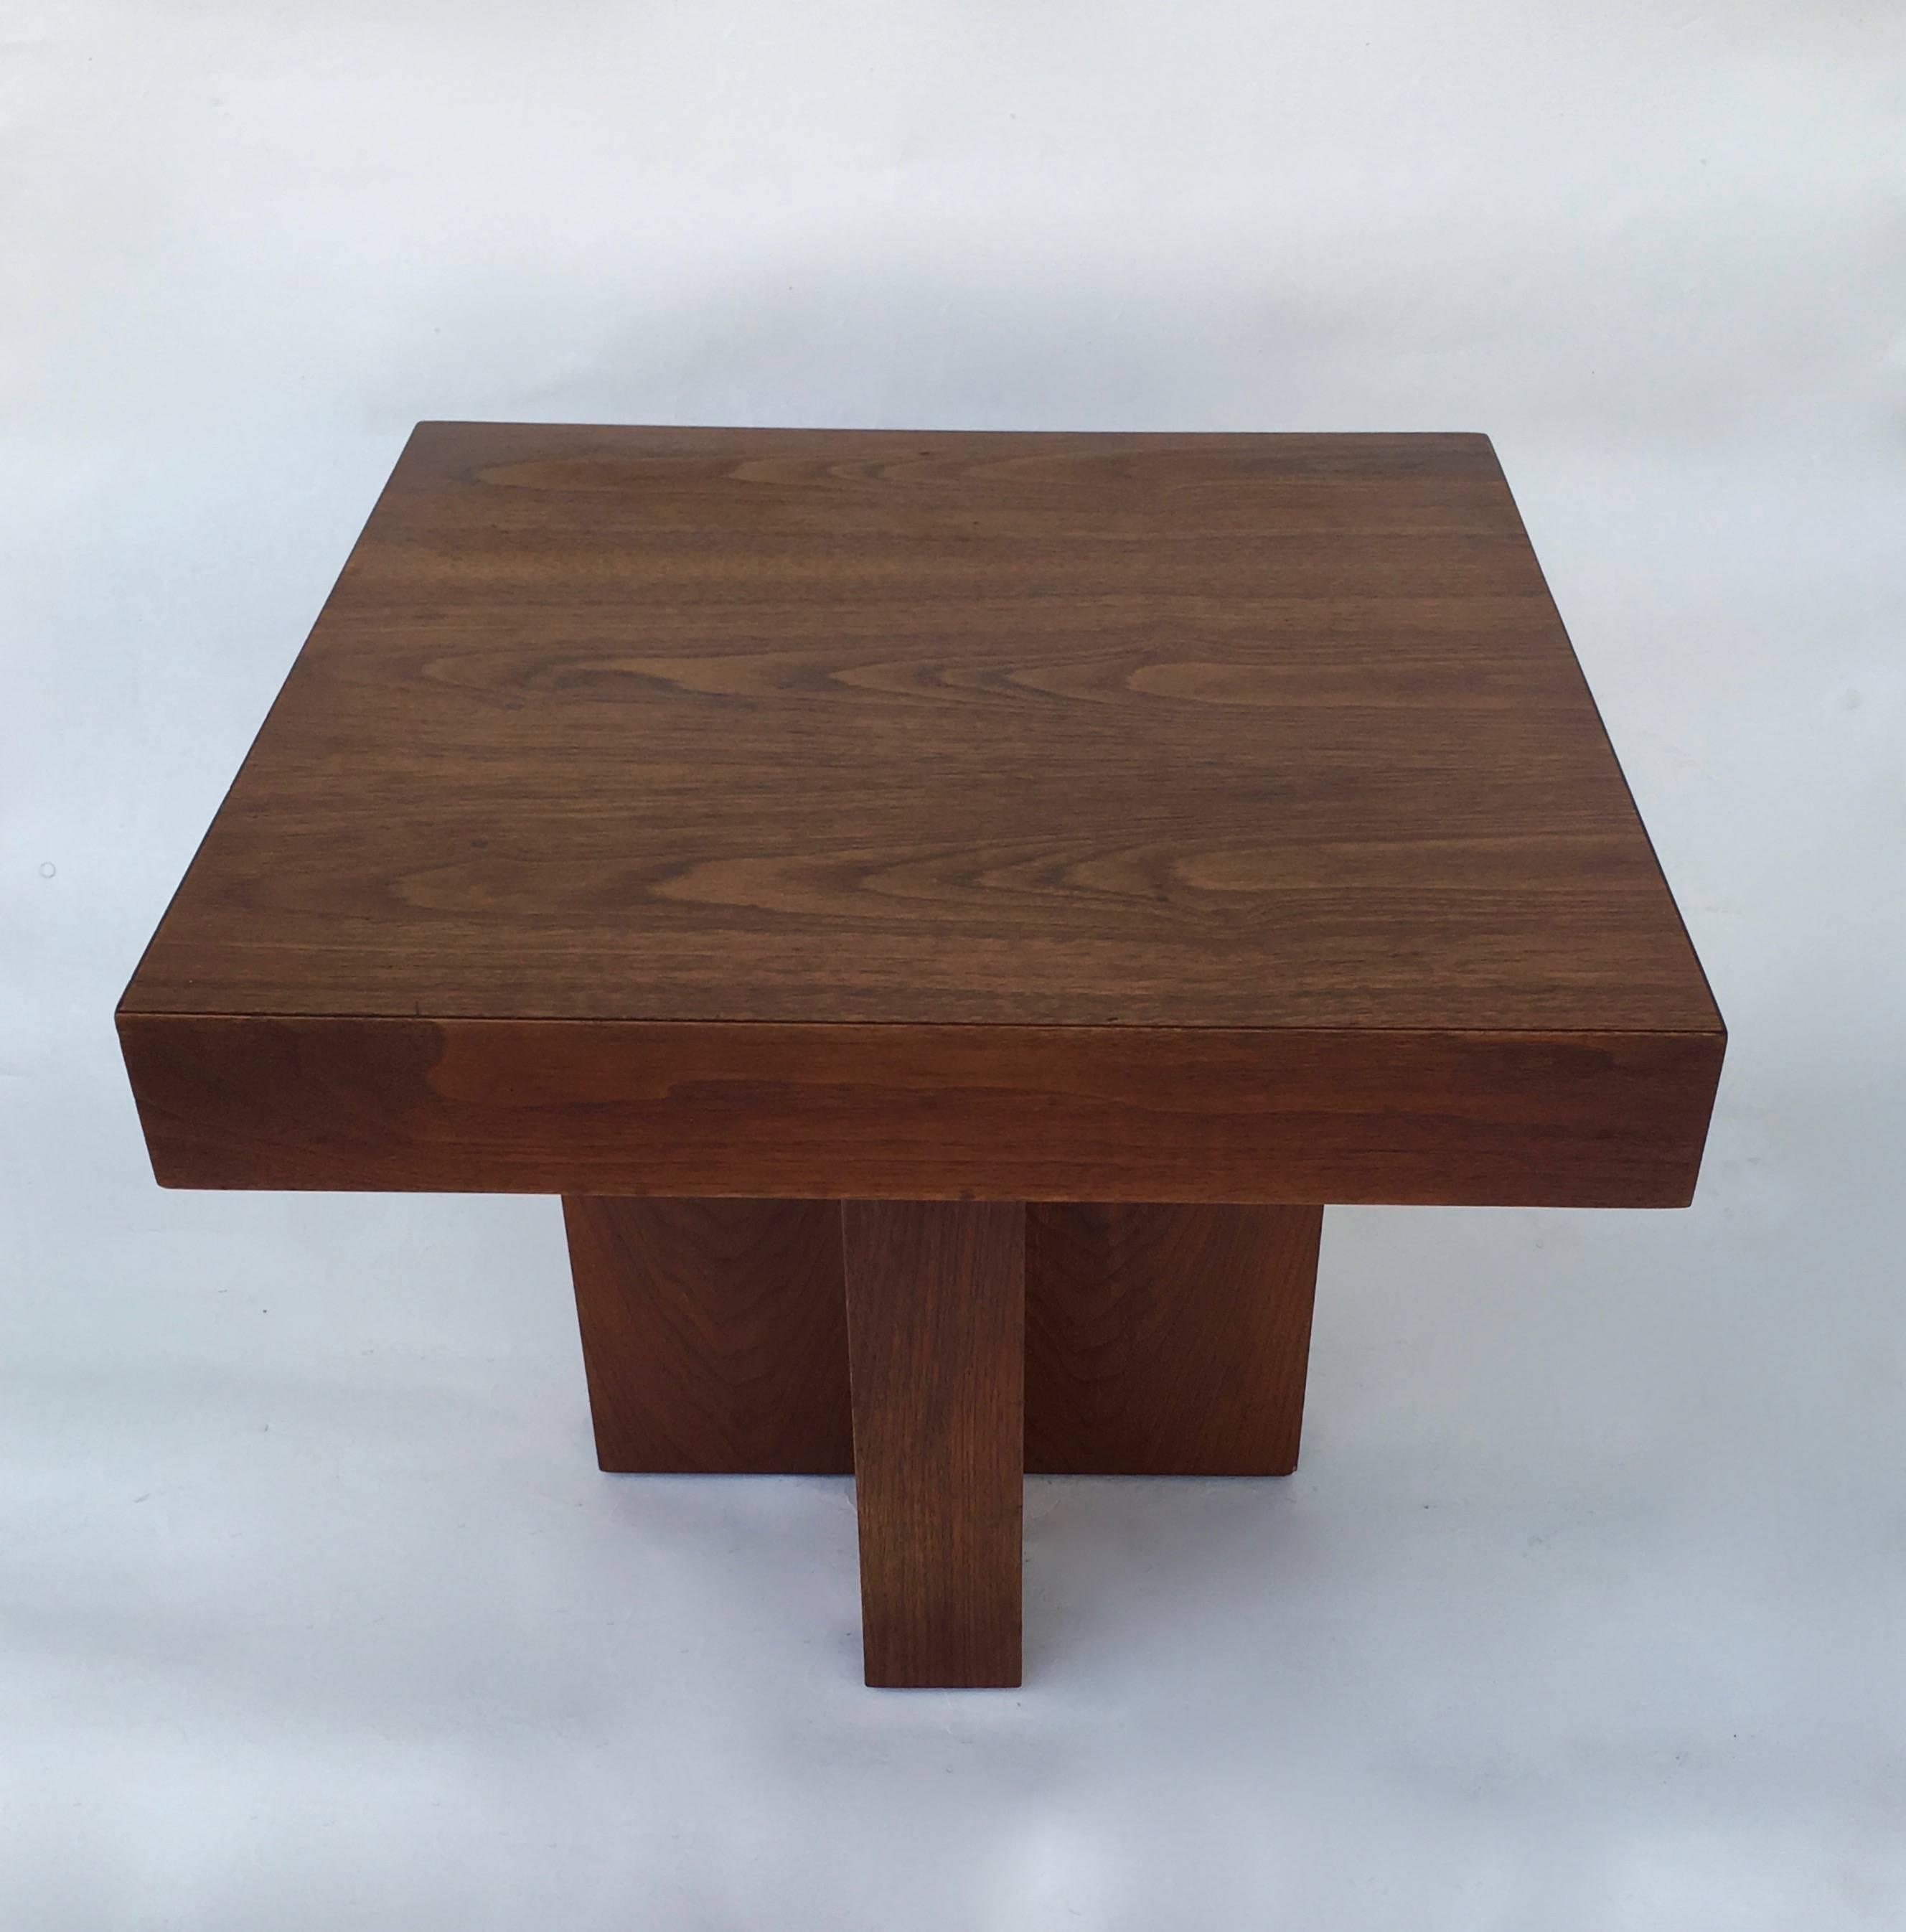 Milo Baughman.
Occasional table.
Manufactured by Thayer Coggin.
Solid walnut top, walnut veneered base.
Measures: 18 x 18 x 15.